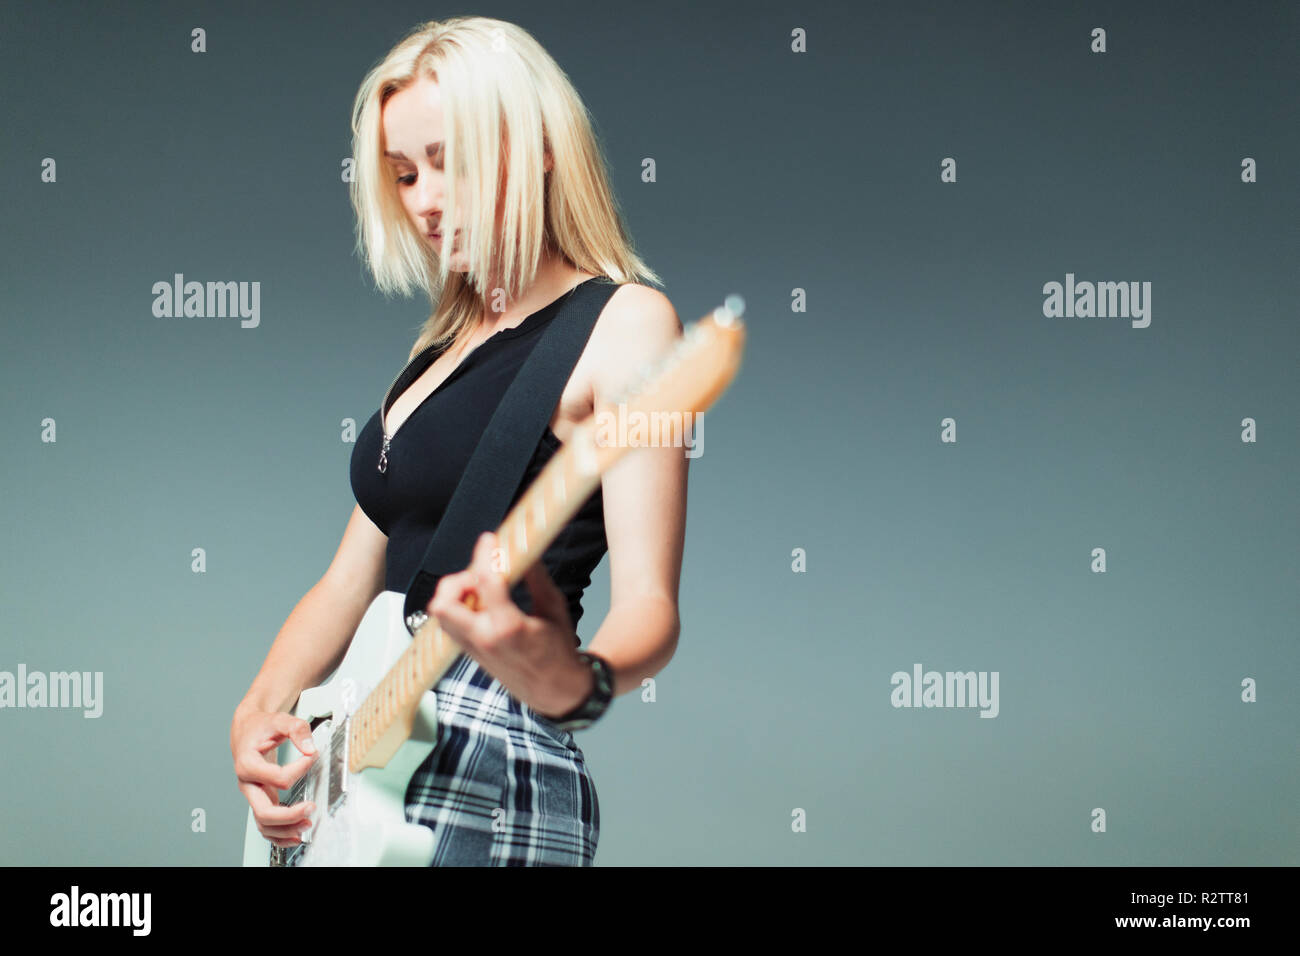 Young woman playing electric guitar Stock Photo